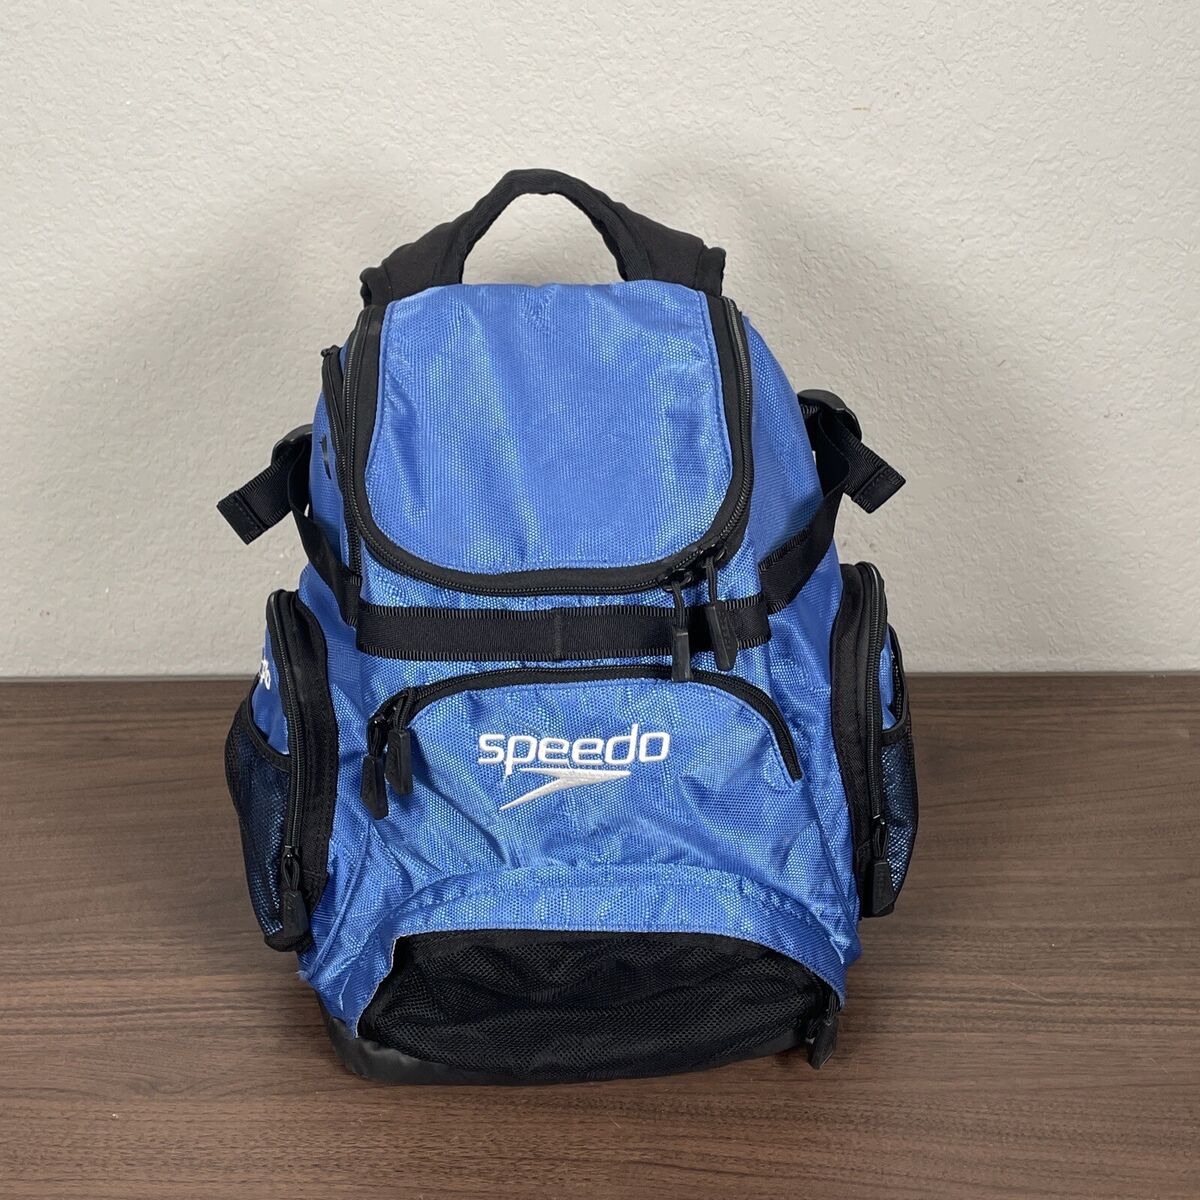 Speedo Teamster Swim Backpack with Dirt/Wet Compartment - Blue RN#54934  Clean!